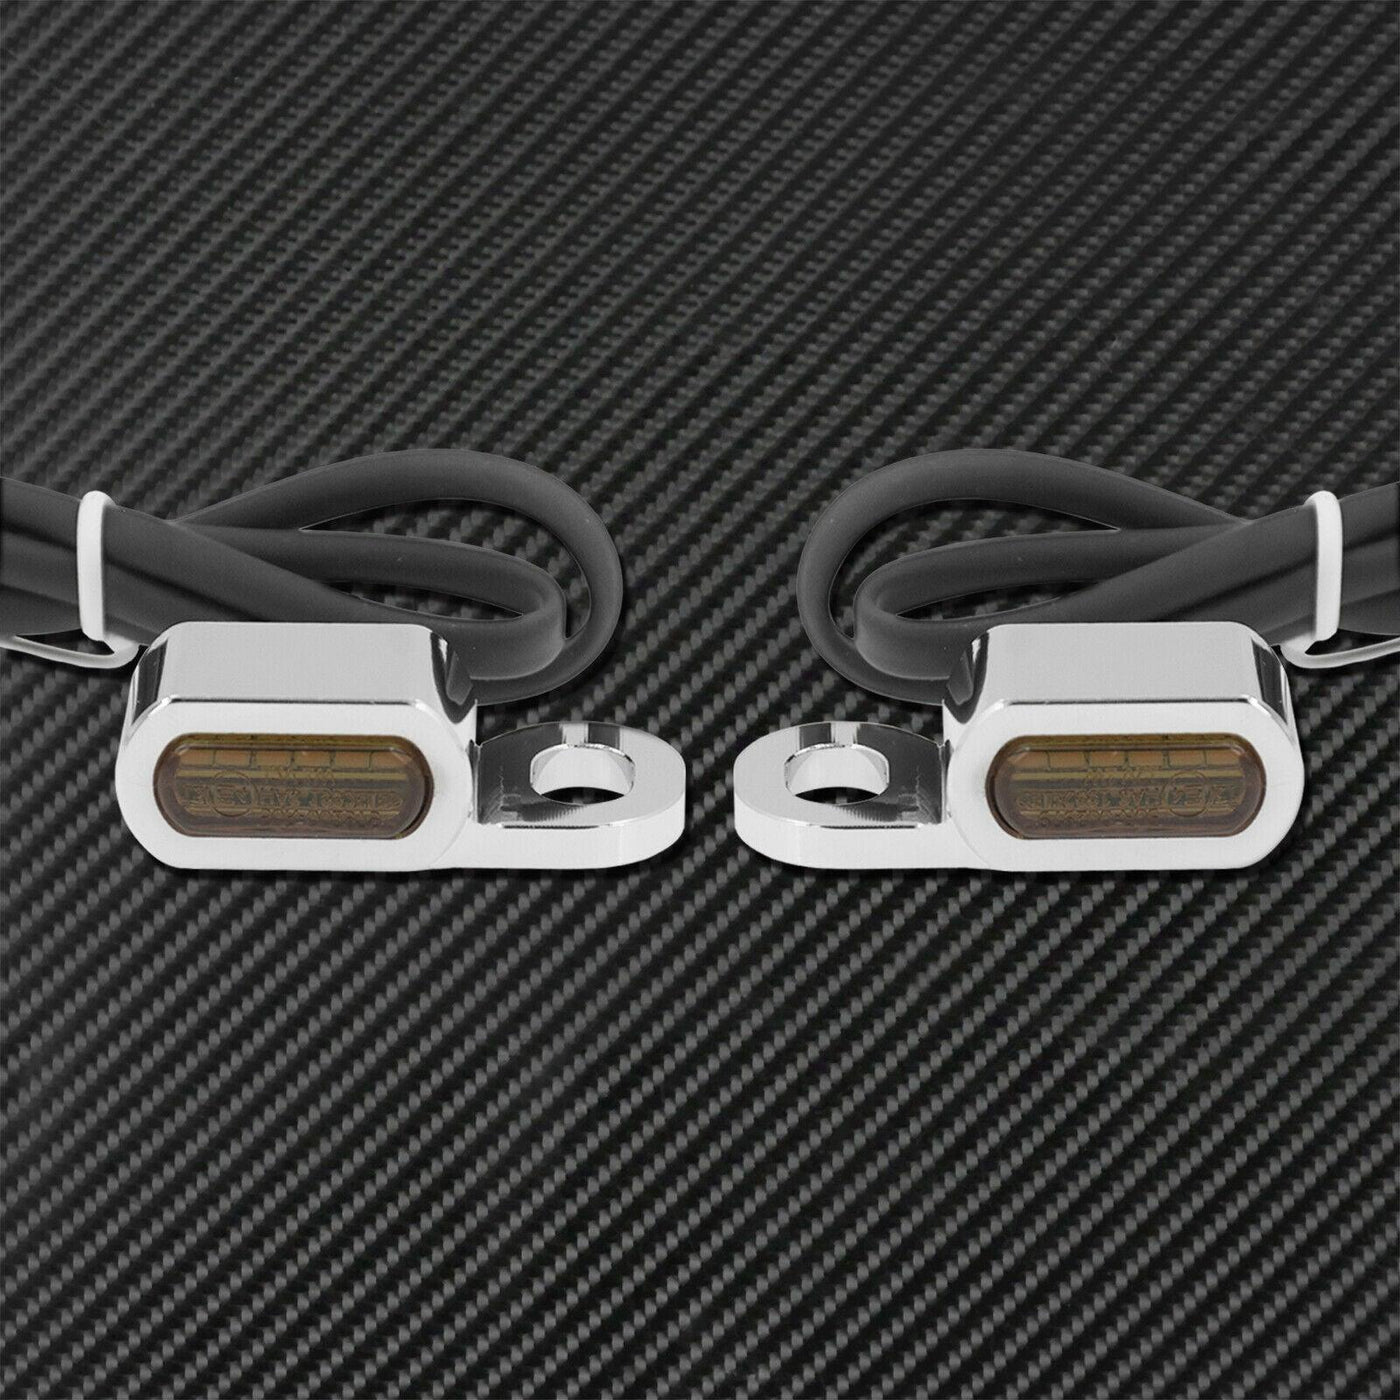 Motorcycle Turn Signal Indicators Blinker Lights Fit For Harley Touring Softail - Moto Life Products